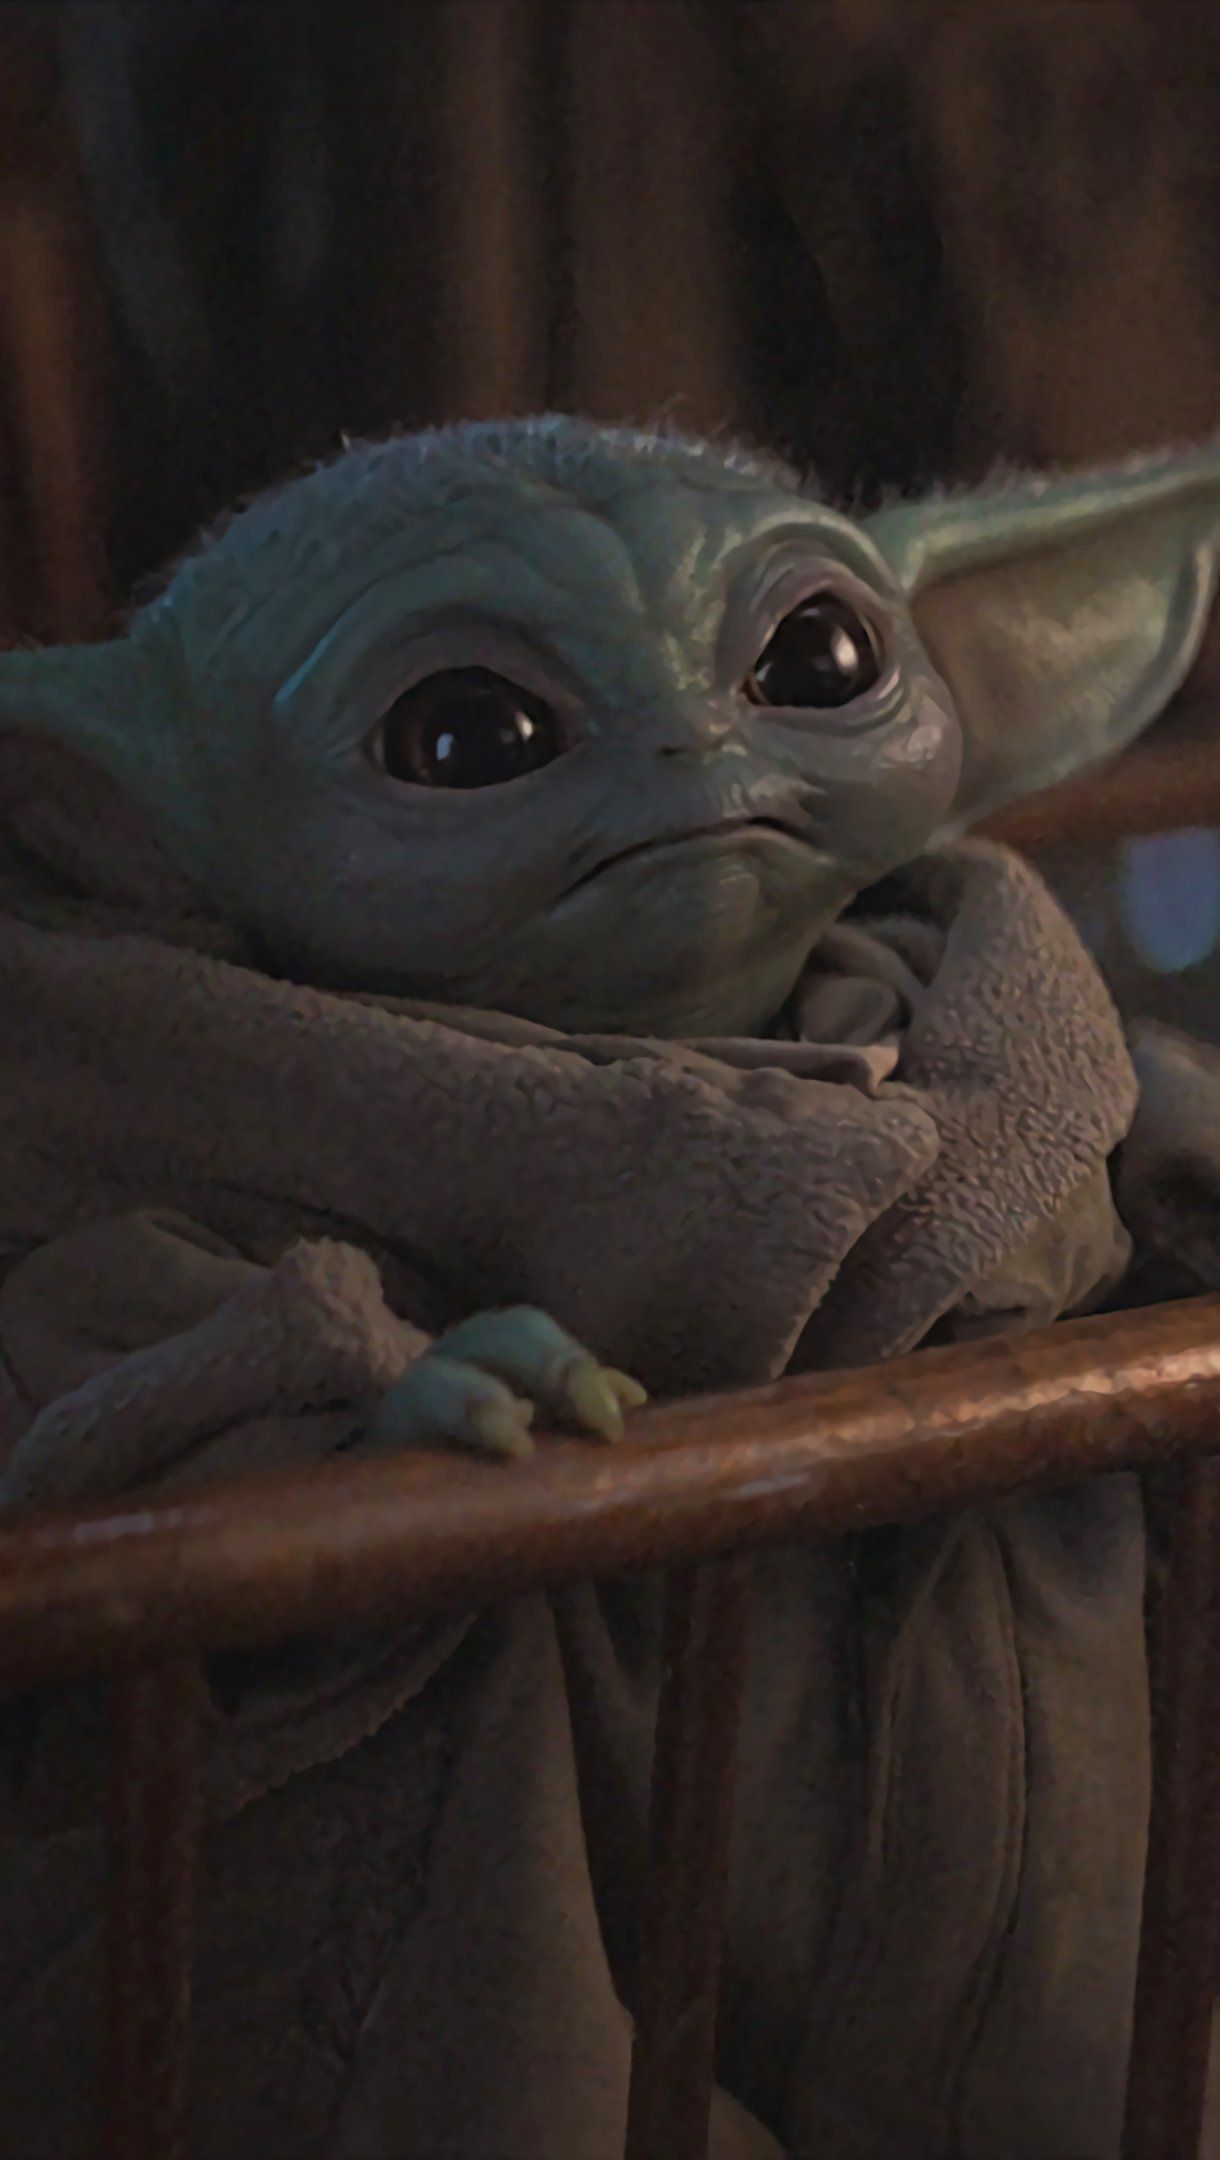 A picture of baby yoda from the mandalorian - Baby Yoda